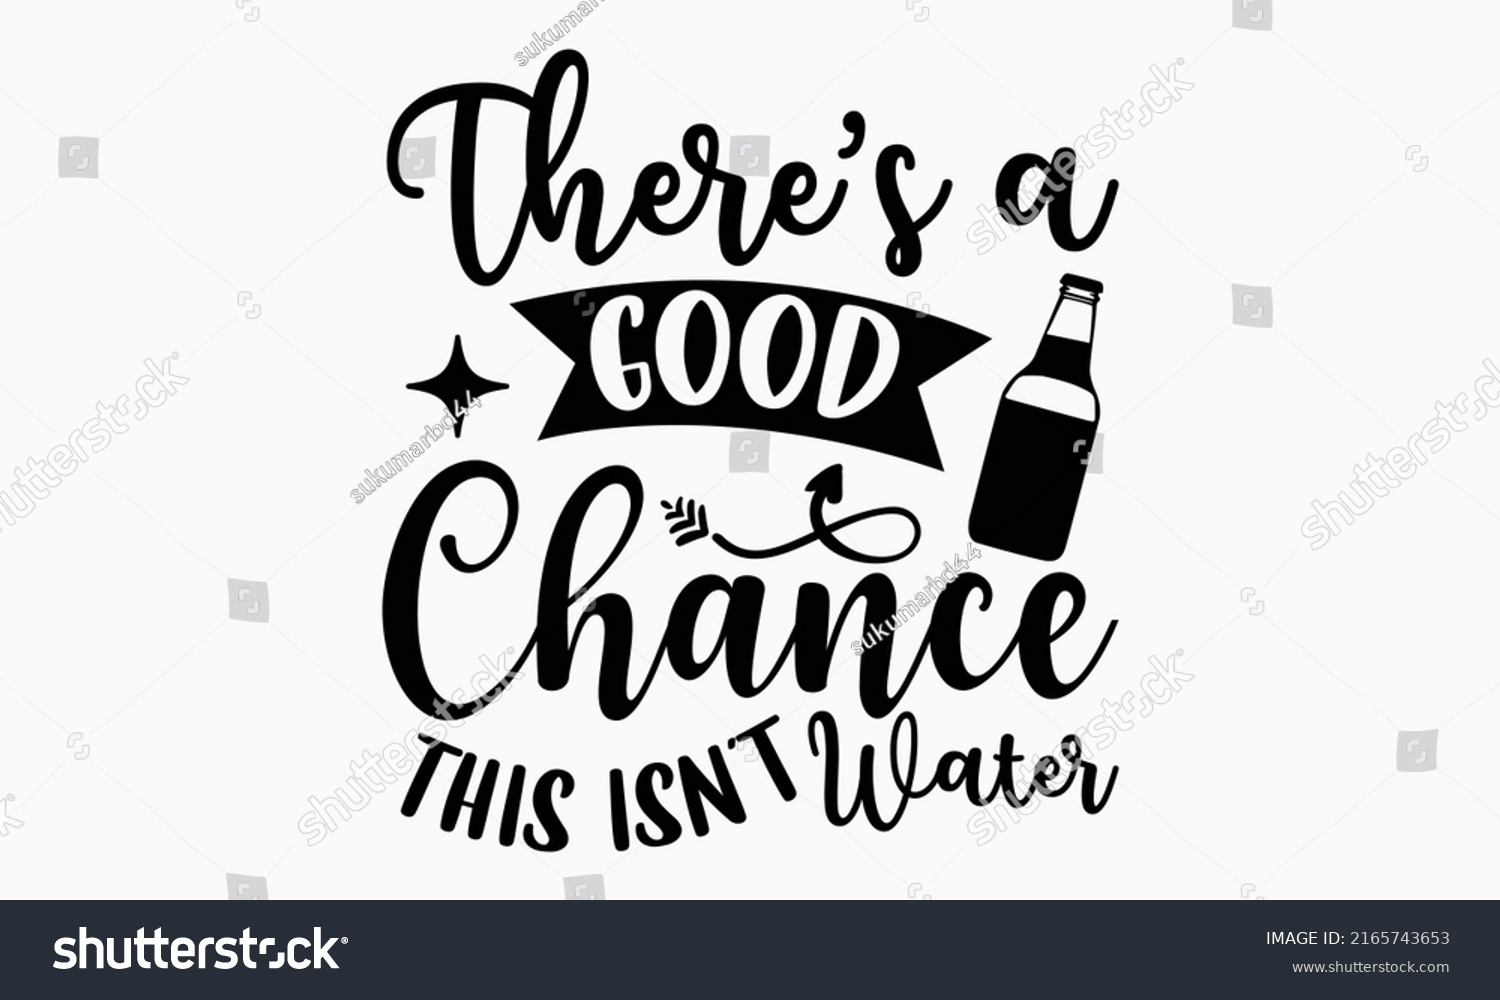 SVG of There’s a good chance this isn’t water - Alcohol t shirt design, Hand drawn lettering phrase, Calligraphy graphic design, SVG Files for Cutting Cricut and Silhouette svg